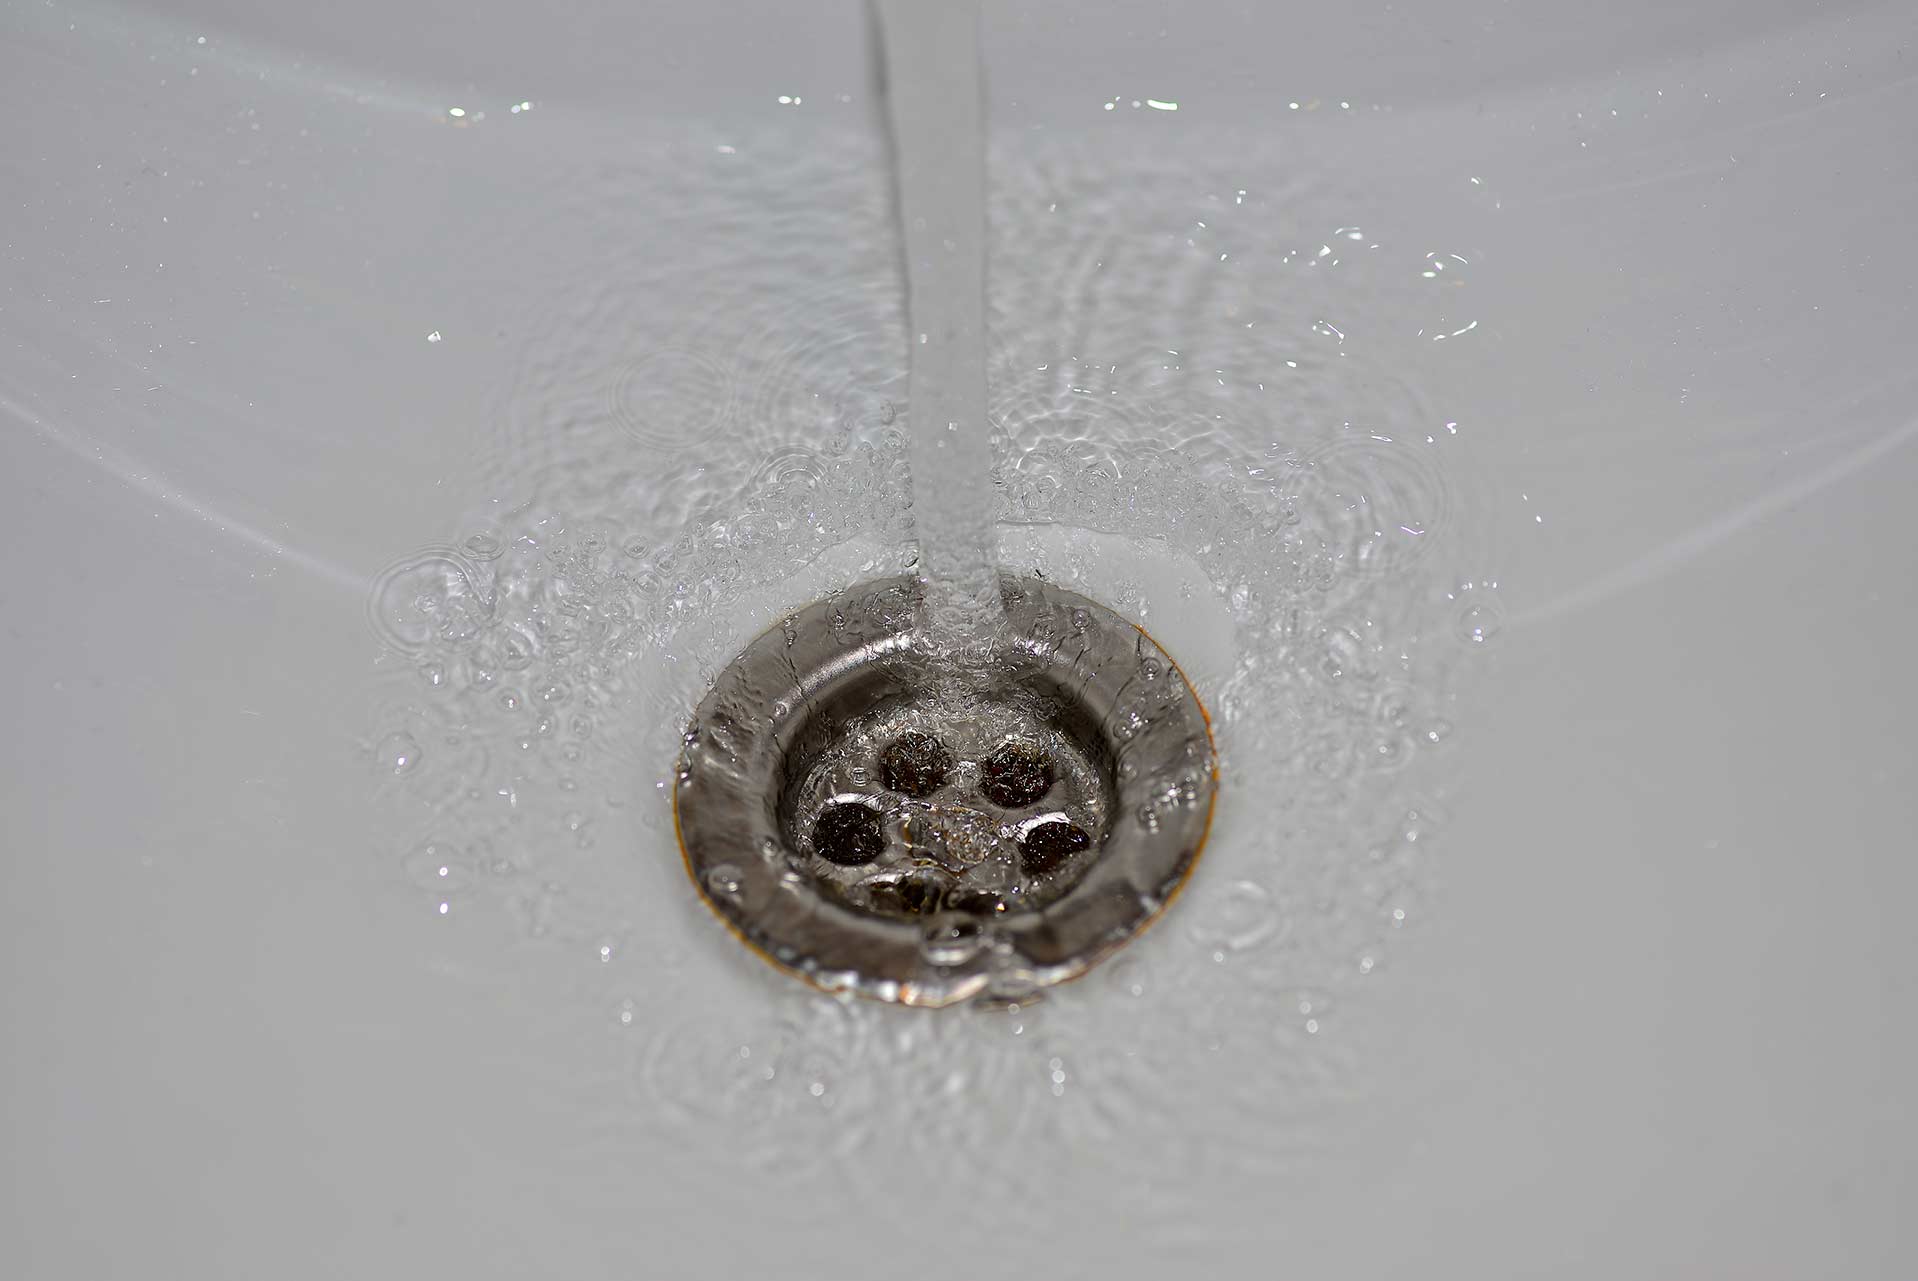 A2B Drains provides services to unblock blocked sinks and drains for properties in Harmondsworth.